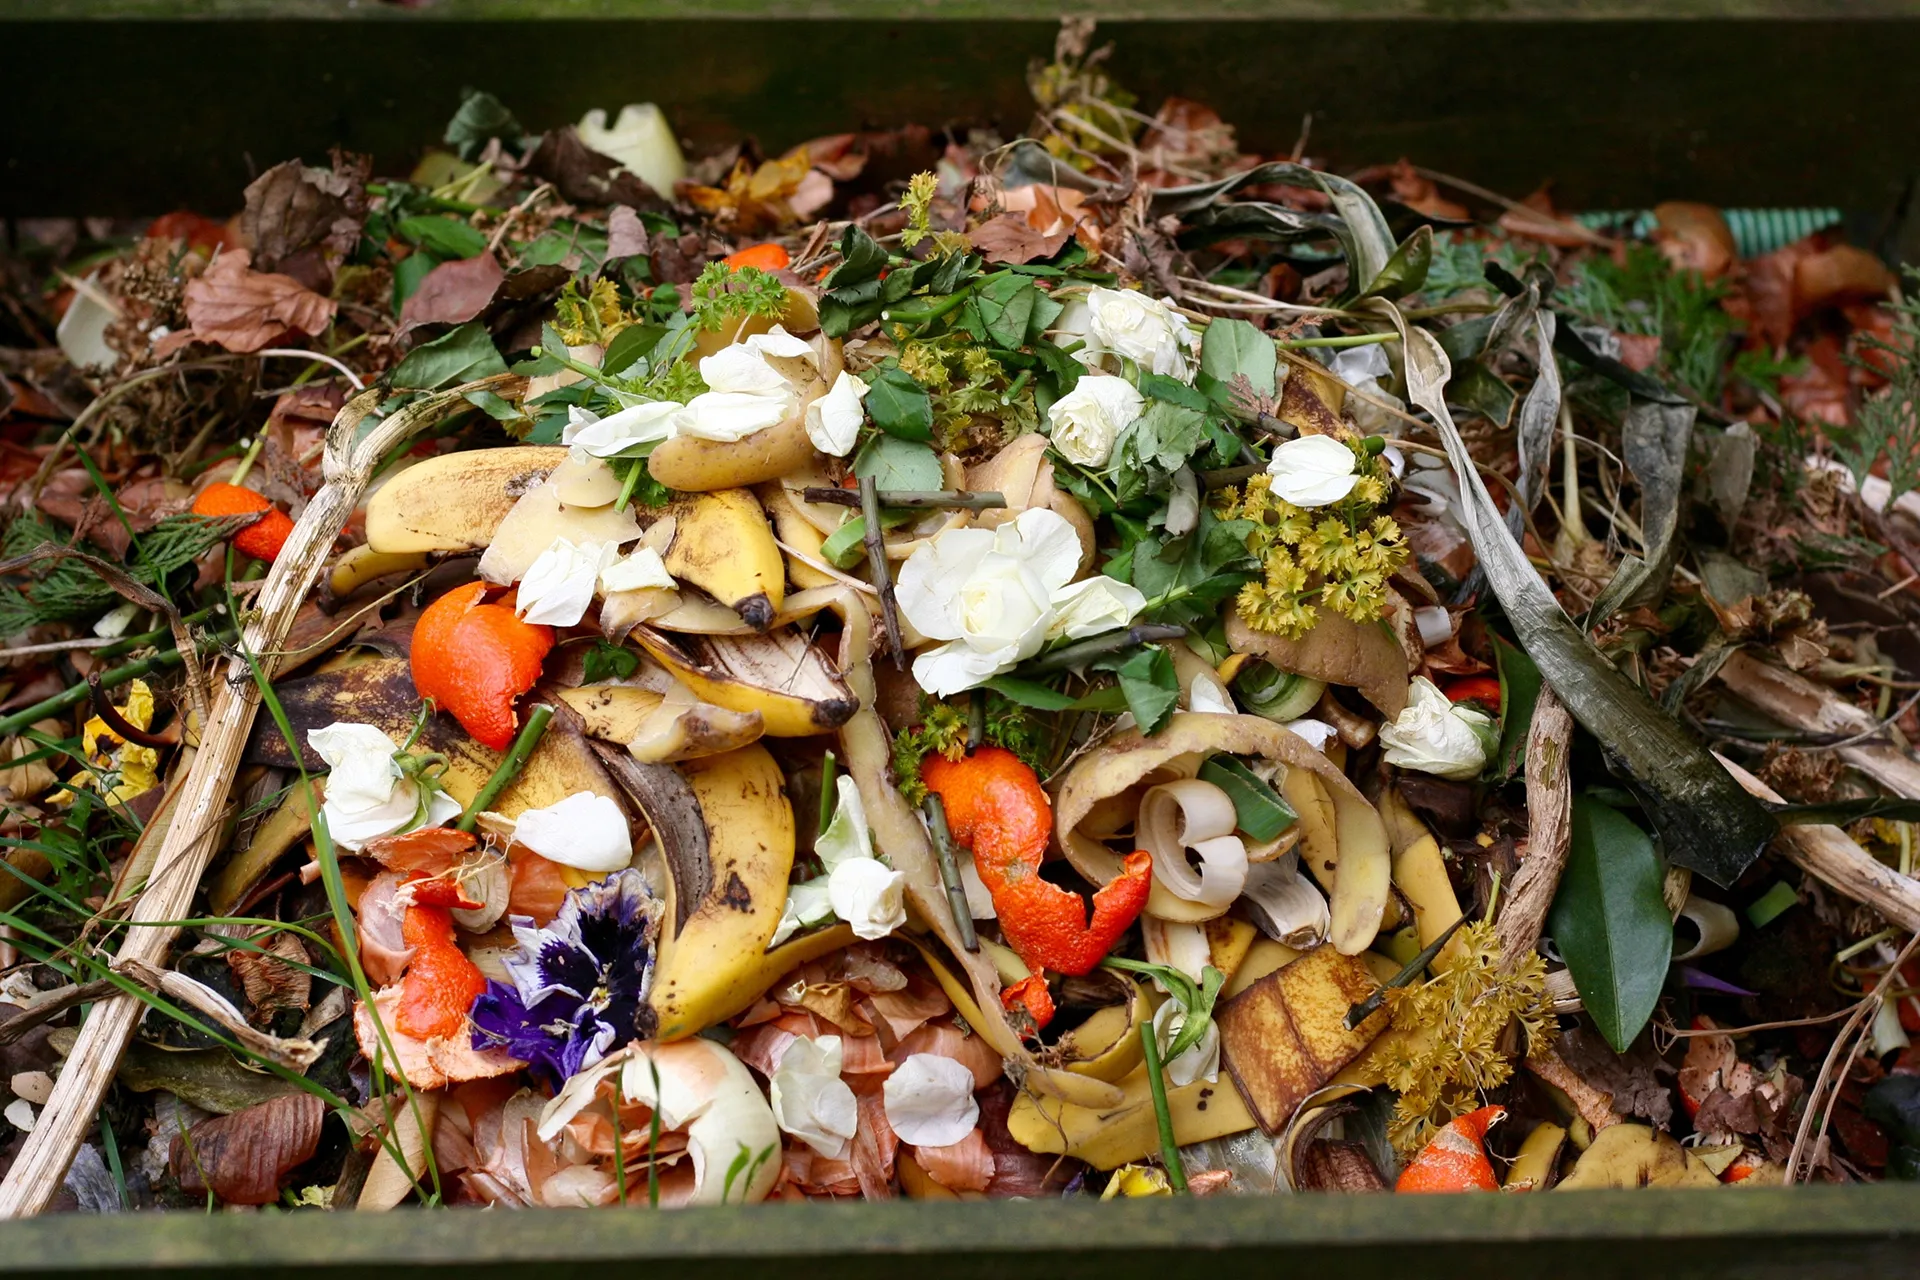 food waste & recycling collections